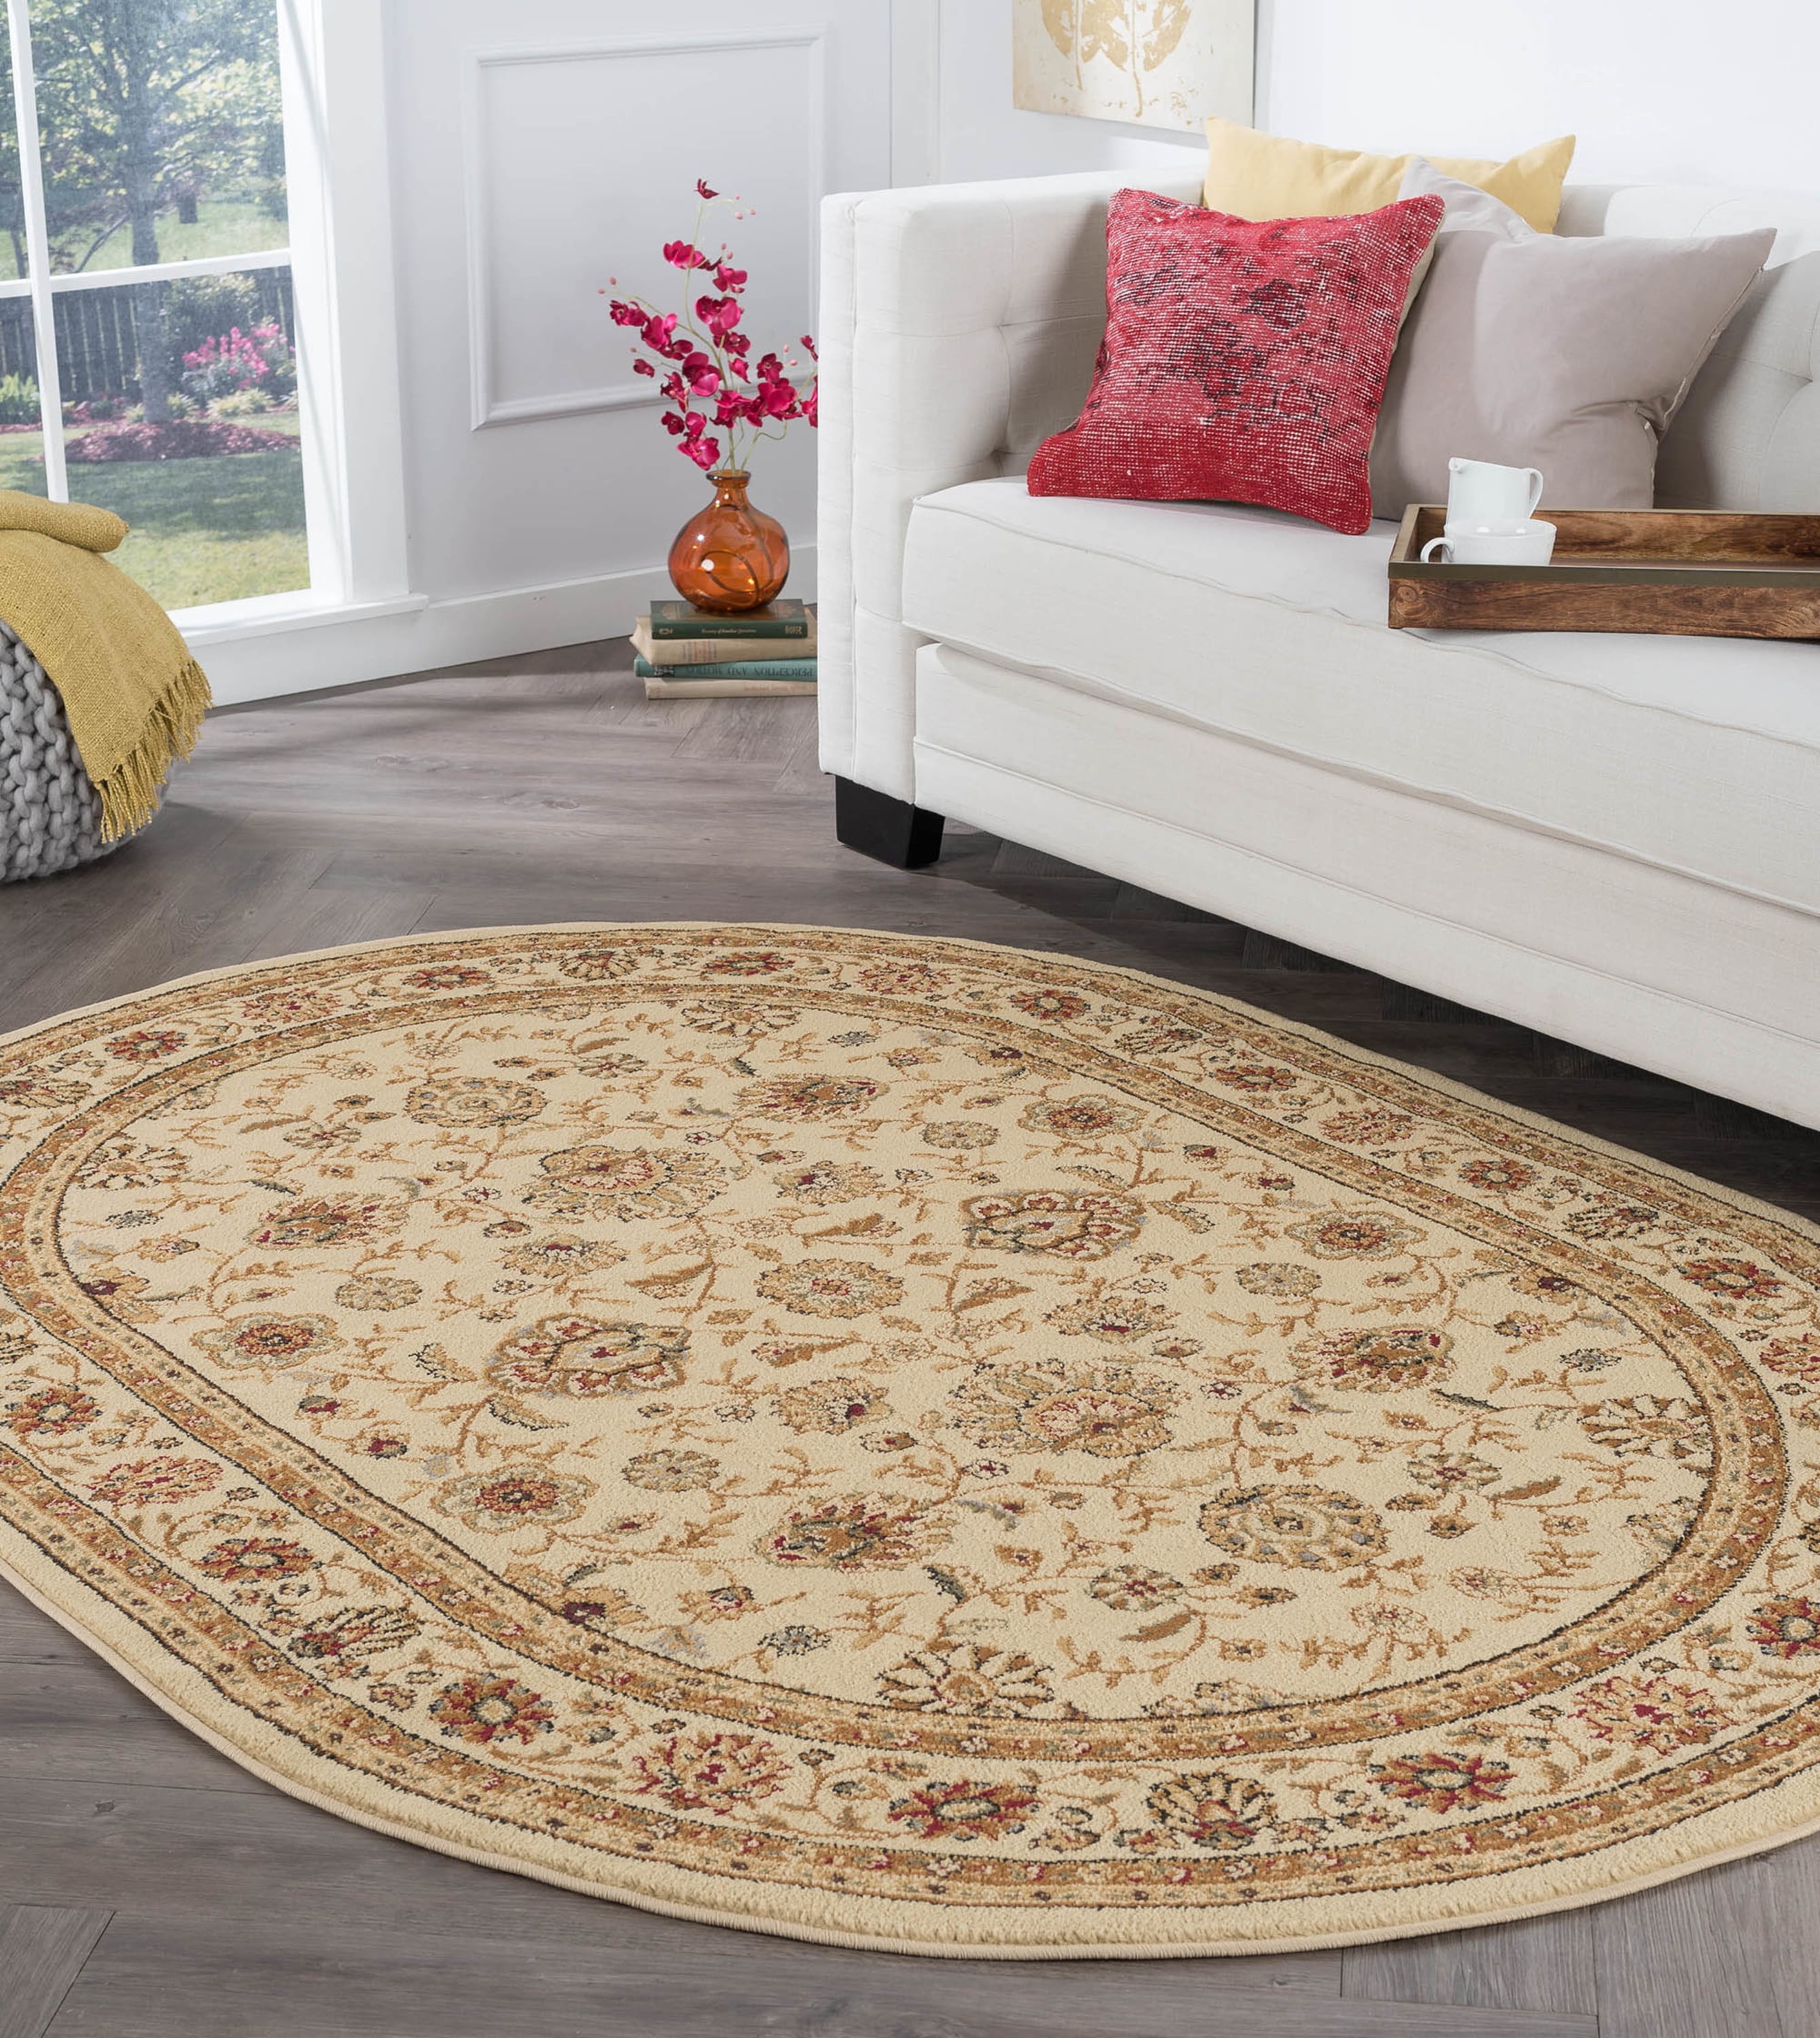 Oval rug in master bedroom - will this fit?